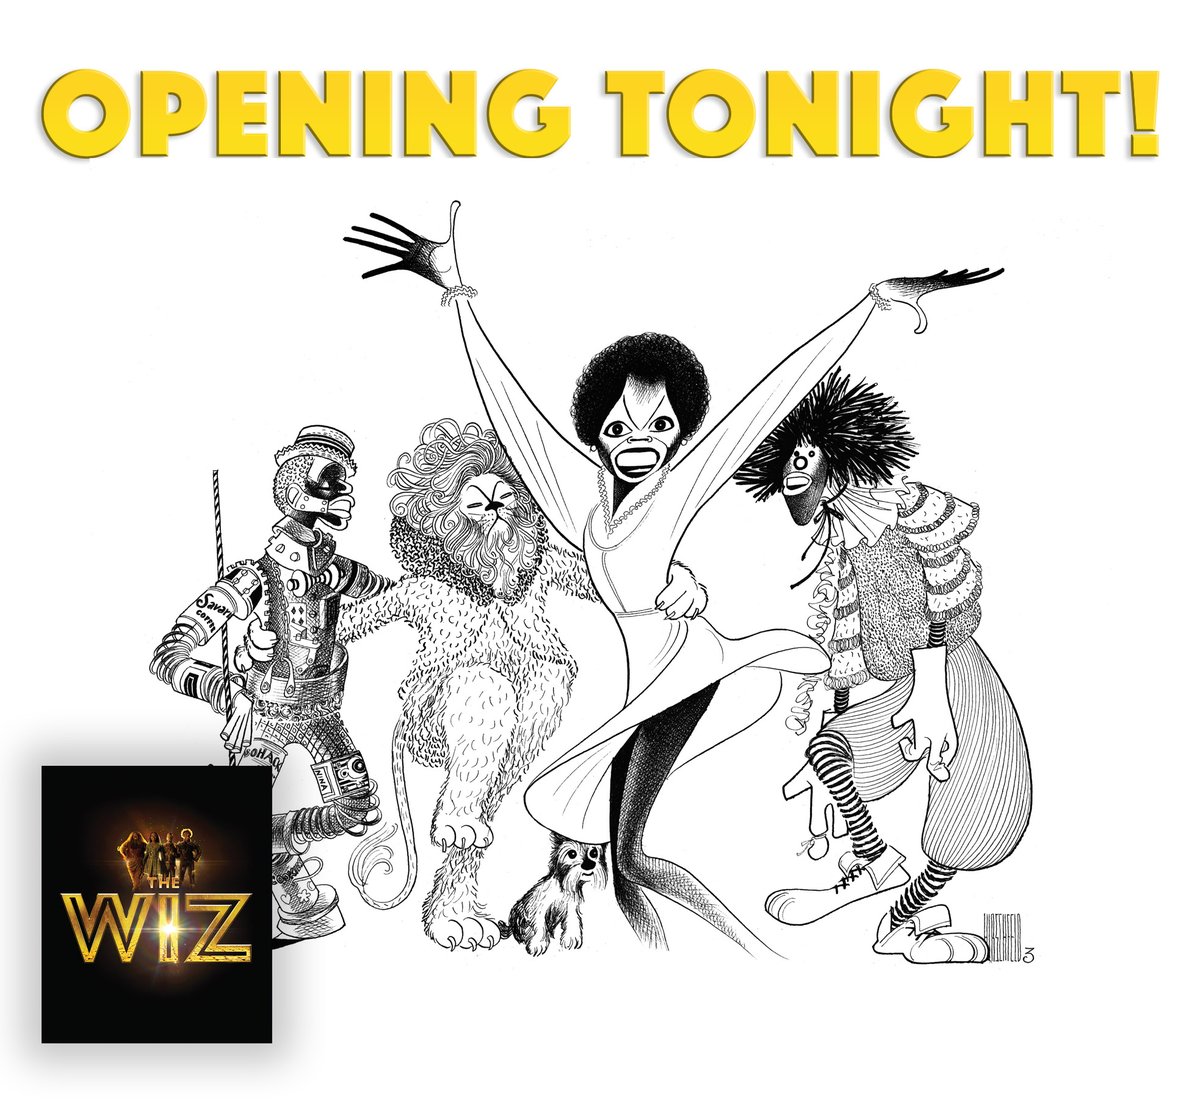 A brand new day is here on Broadway! Break a leg to the cast and crew of @thewizbway on your opening tonight! Drawing: The Wiz (Film), 1978 with Nipsey Russell, Ted Ross, Diana Ross, and Michael Jackson